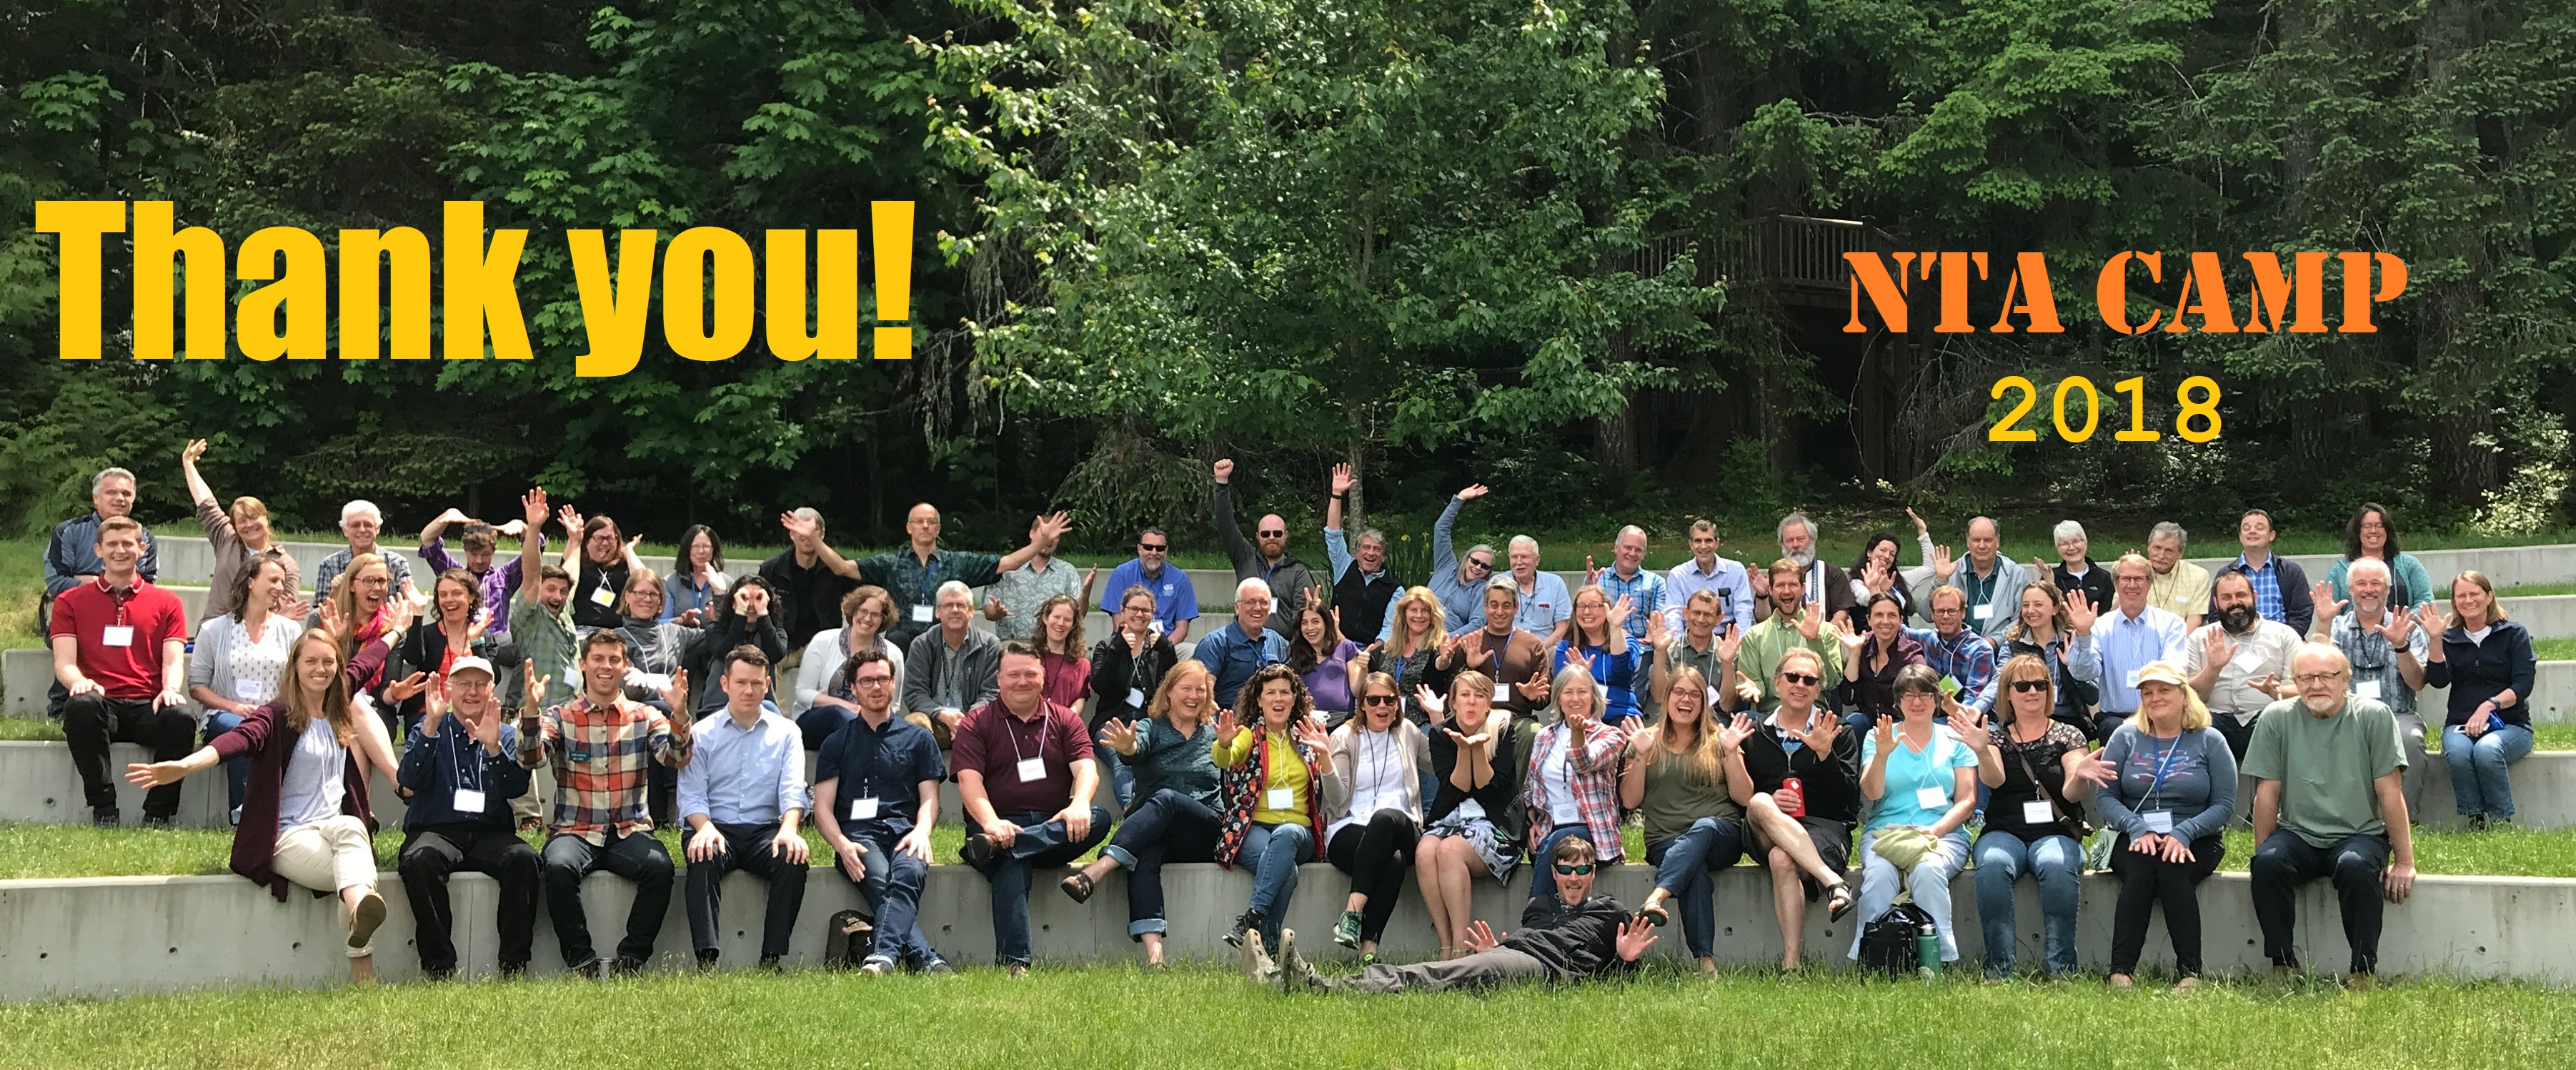 Thank you to all of our reviewers and everyone who submitted Near Term Action ideas. We could not do the work we do without you!